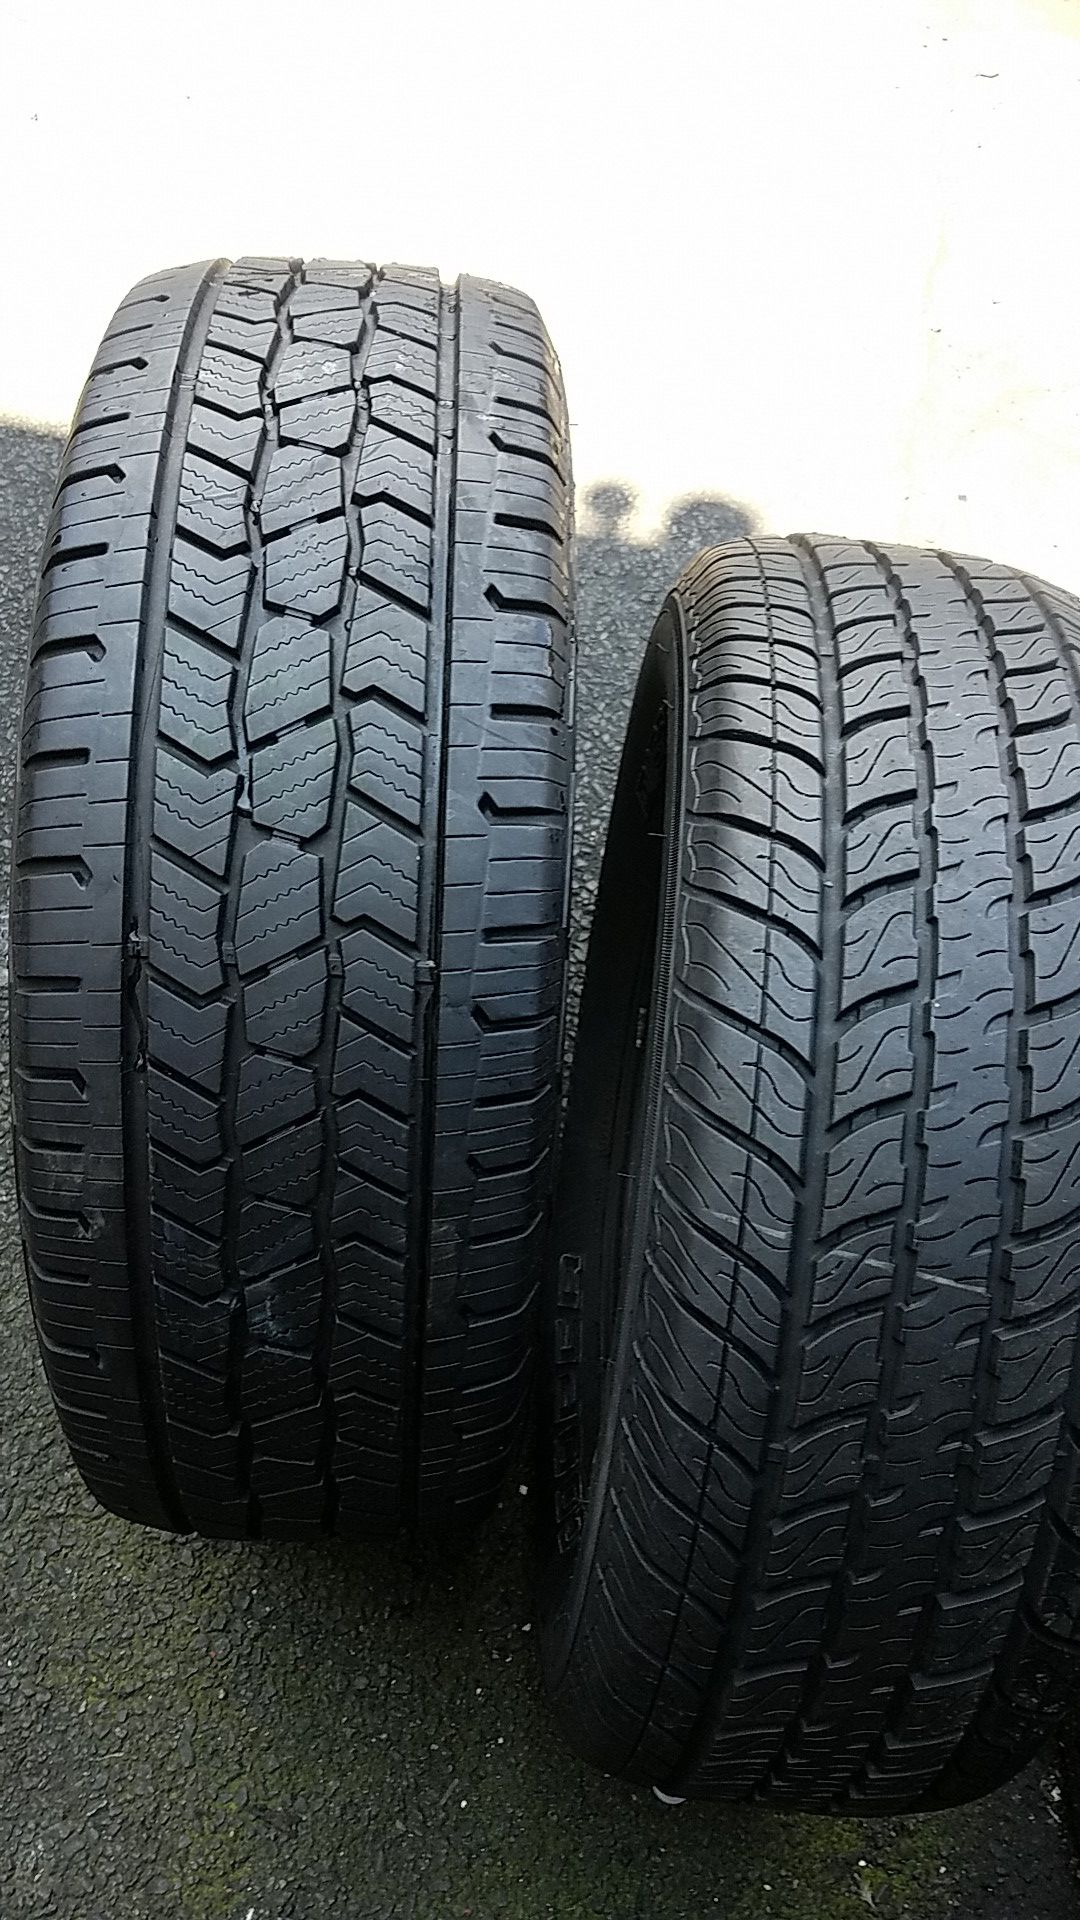 2 good tires for sale 235/70/15